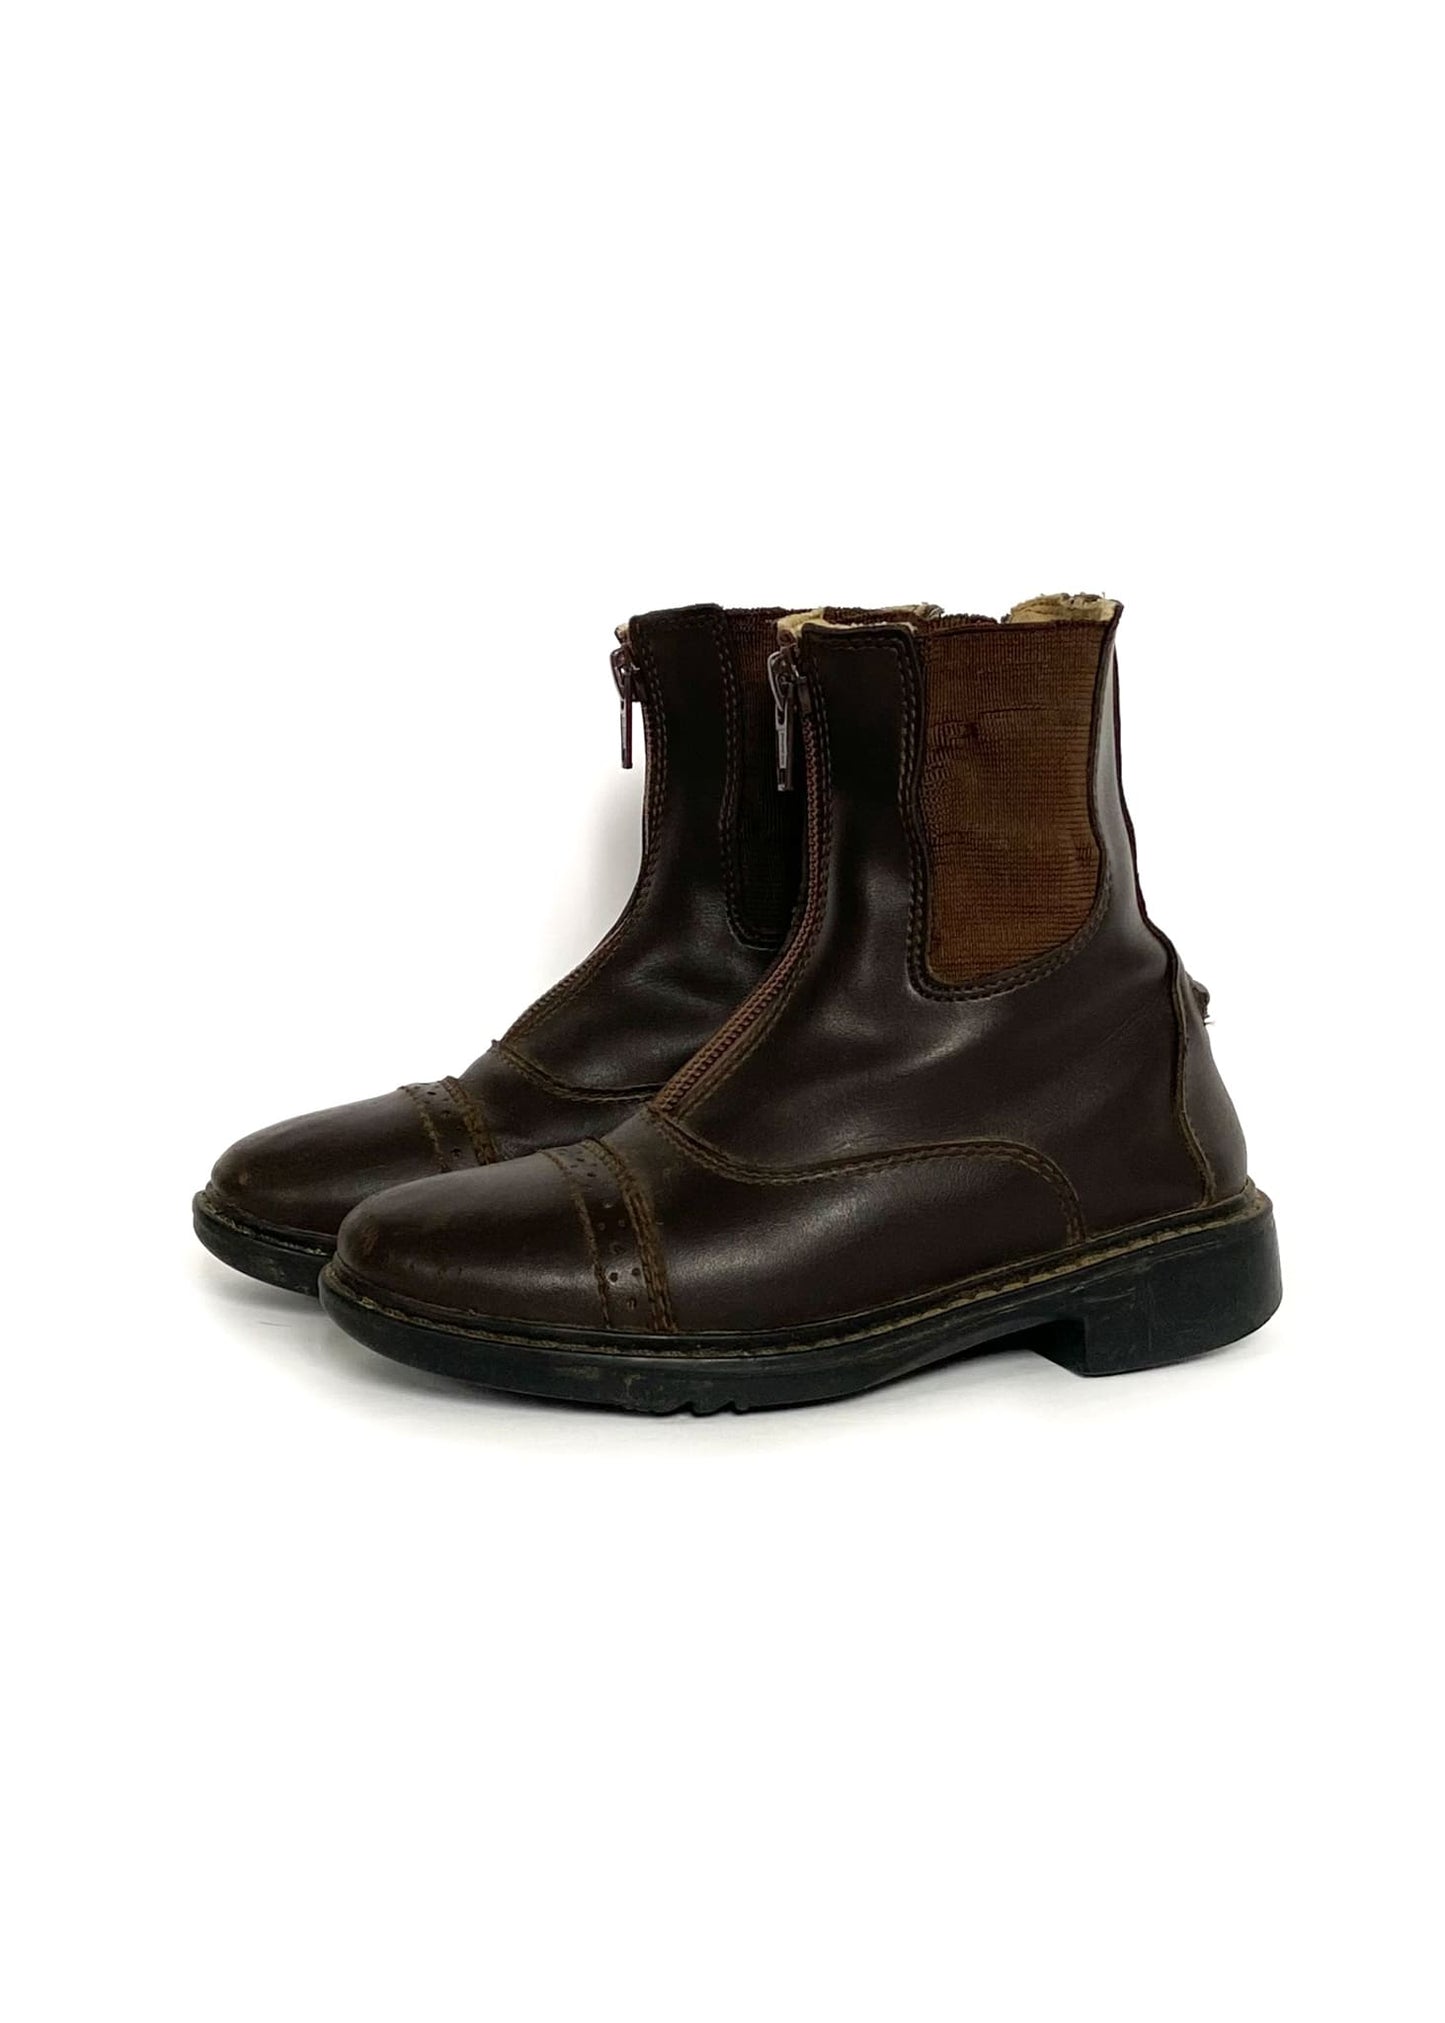 TuffRider Starter Paddock Boots - Brown - Youth 12